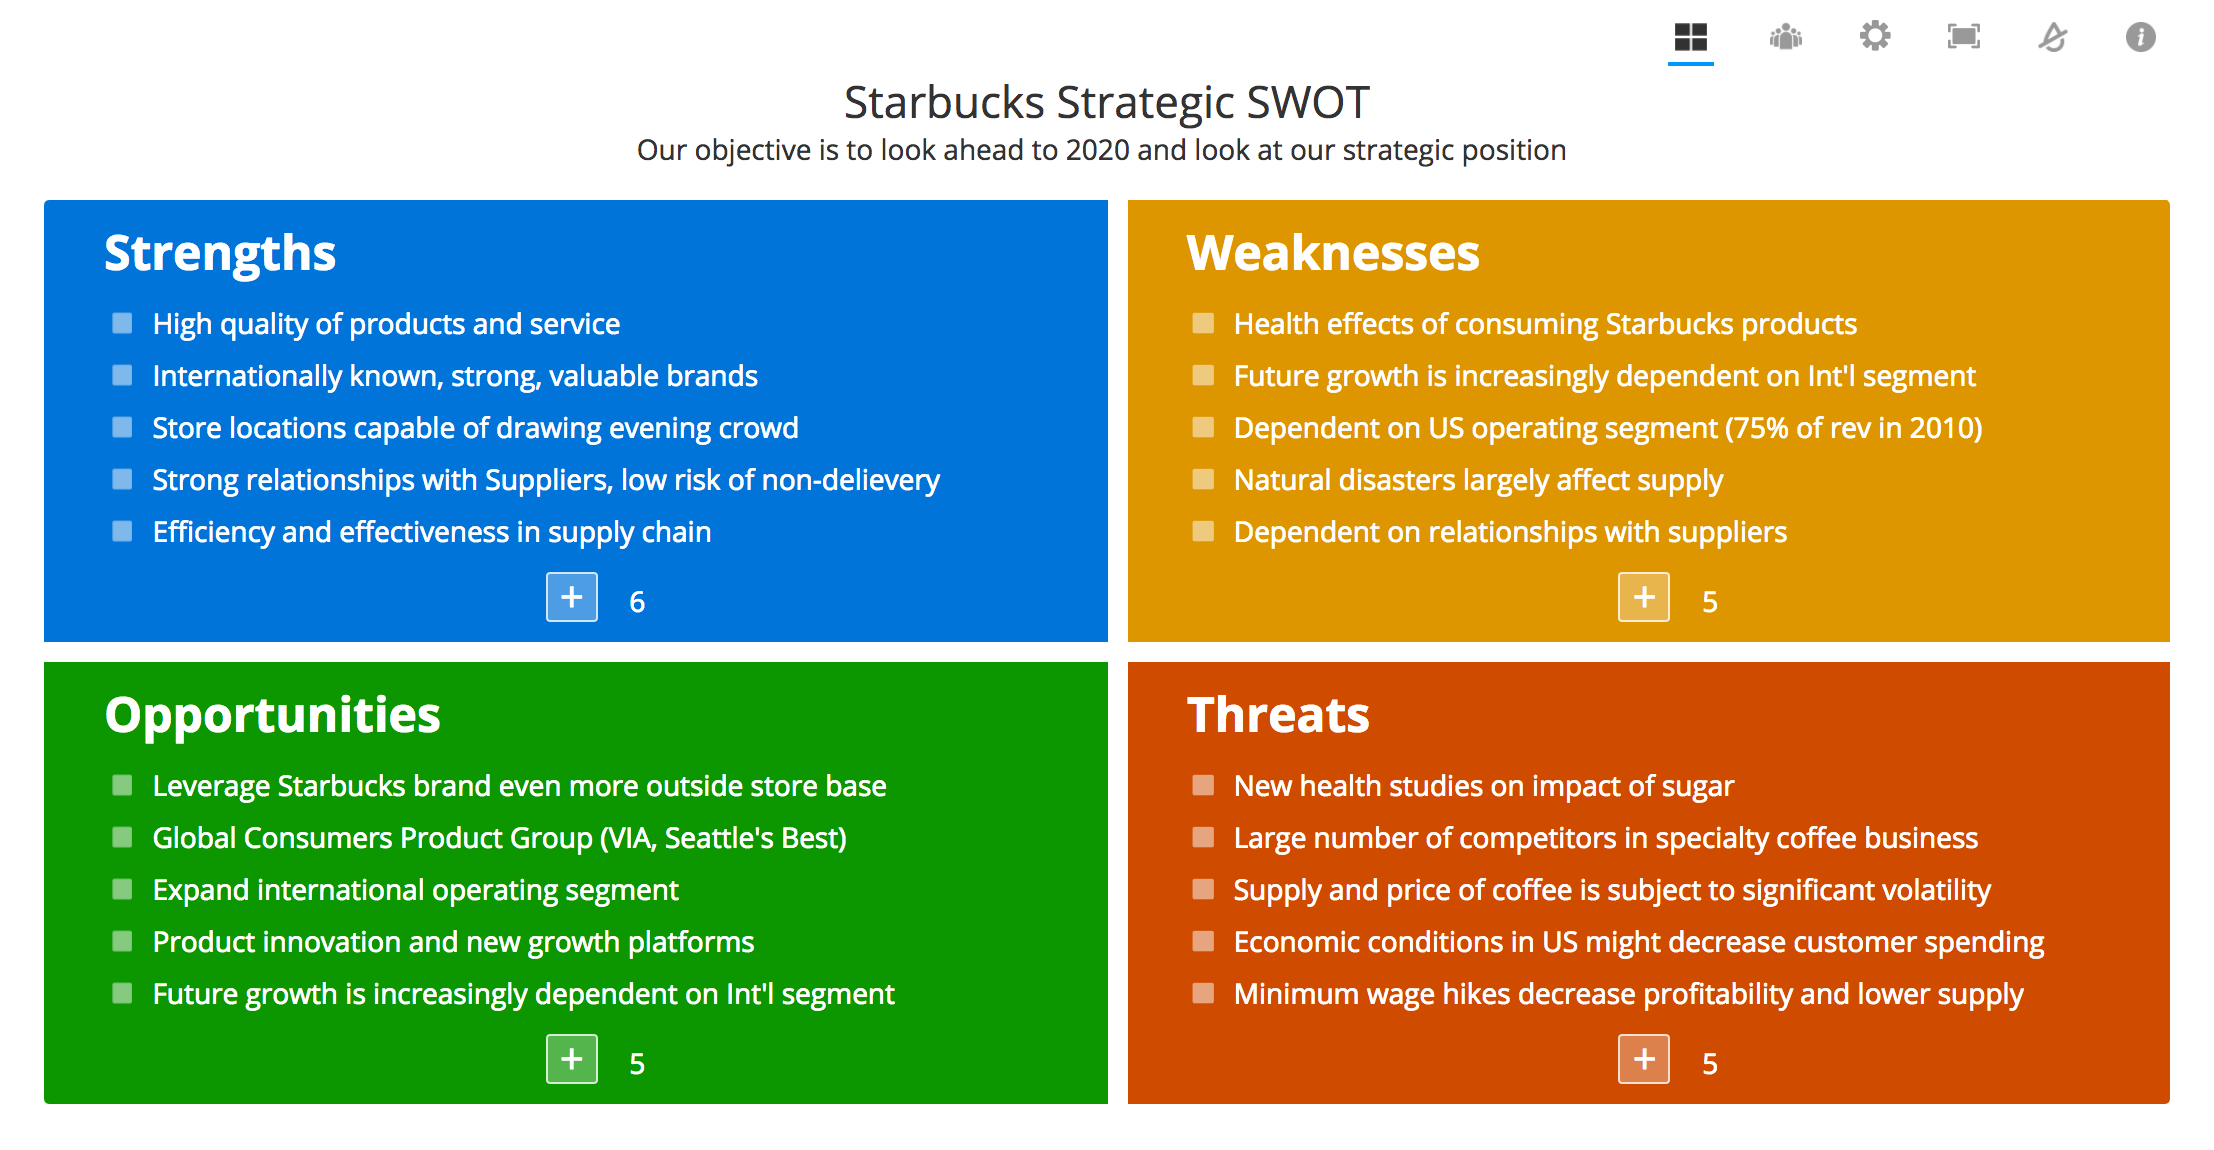 swot-analysis-examples-4.png-183.3kB